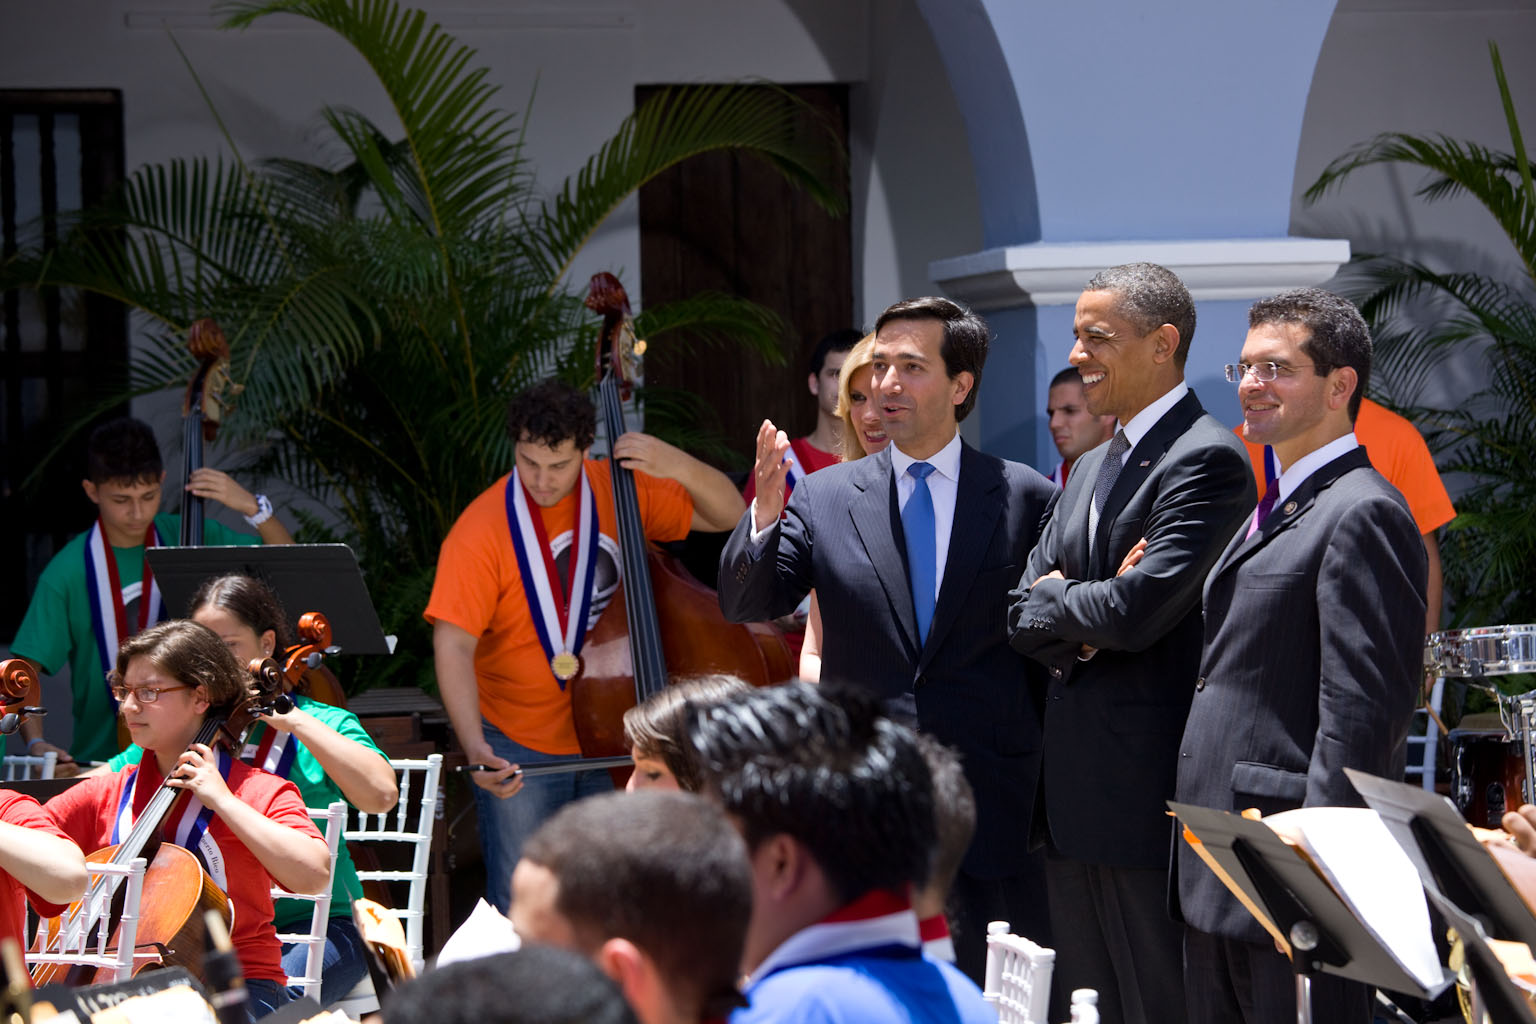 President Obama with Governor and Band [Spanish Caption]